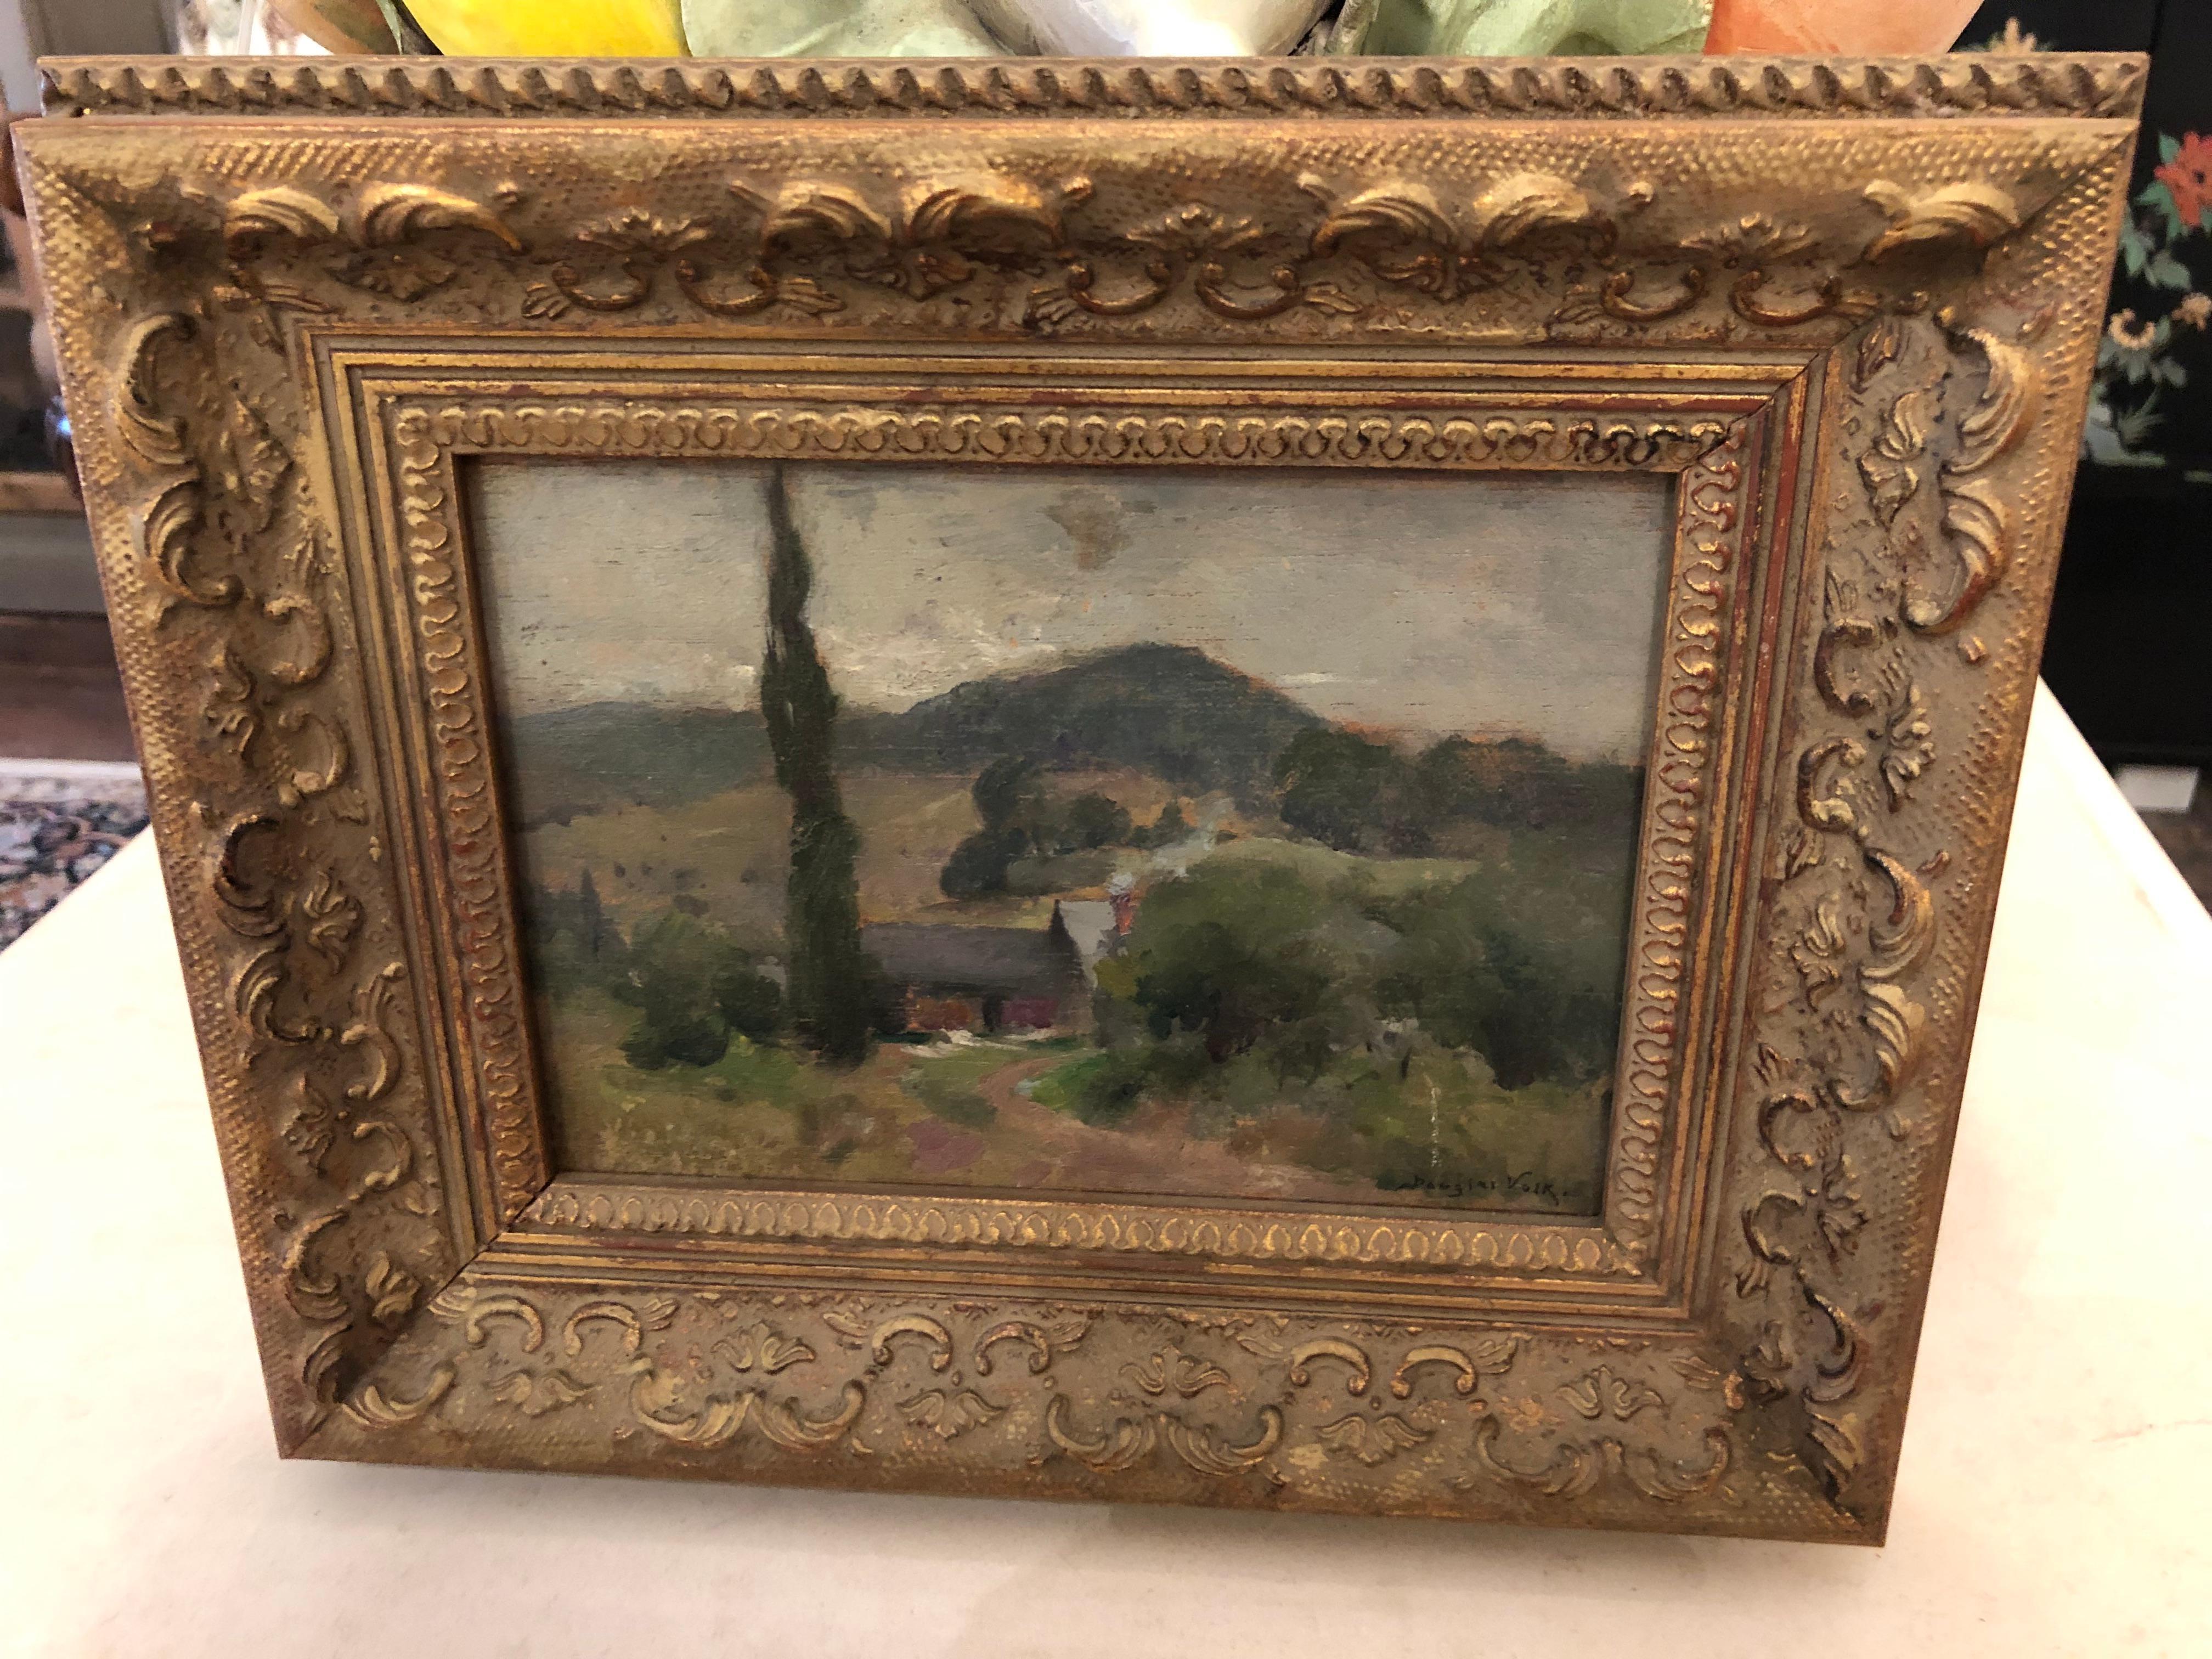 Beautifully rendered small landscape on panel by  Douglas Volk (February 23, 1856 – February 7, 1935), an American portrait and figure painter, muralist, and educator. He taught at the Cooper Union, the Art Students League of New York, and was one